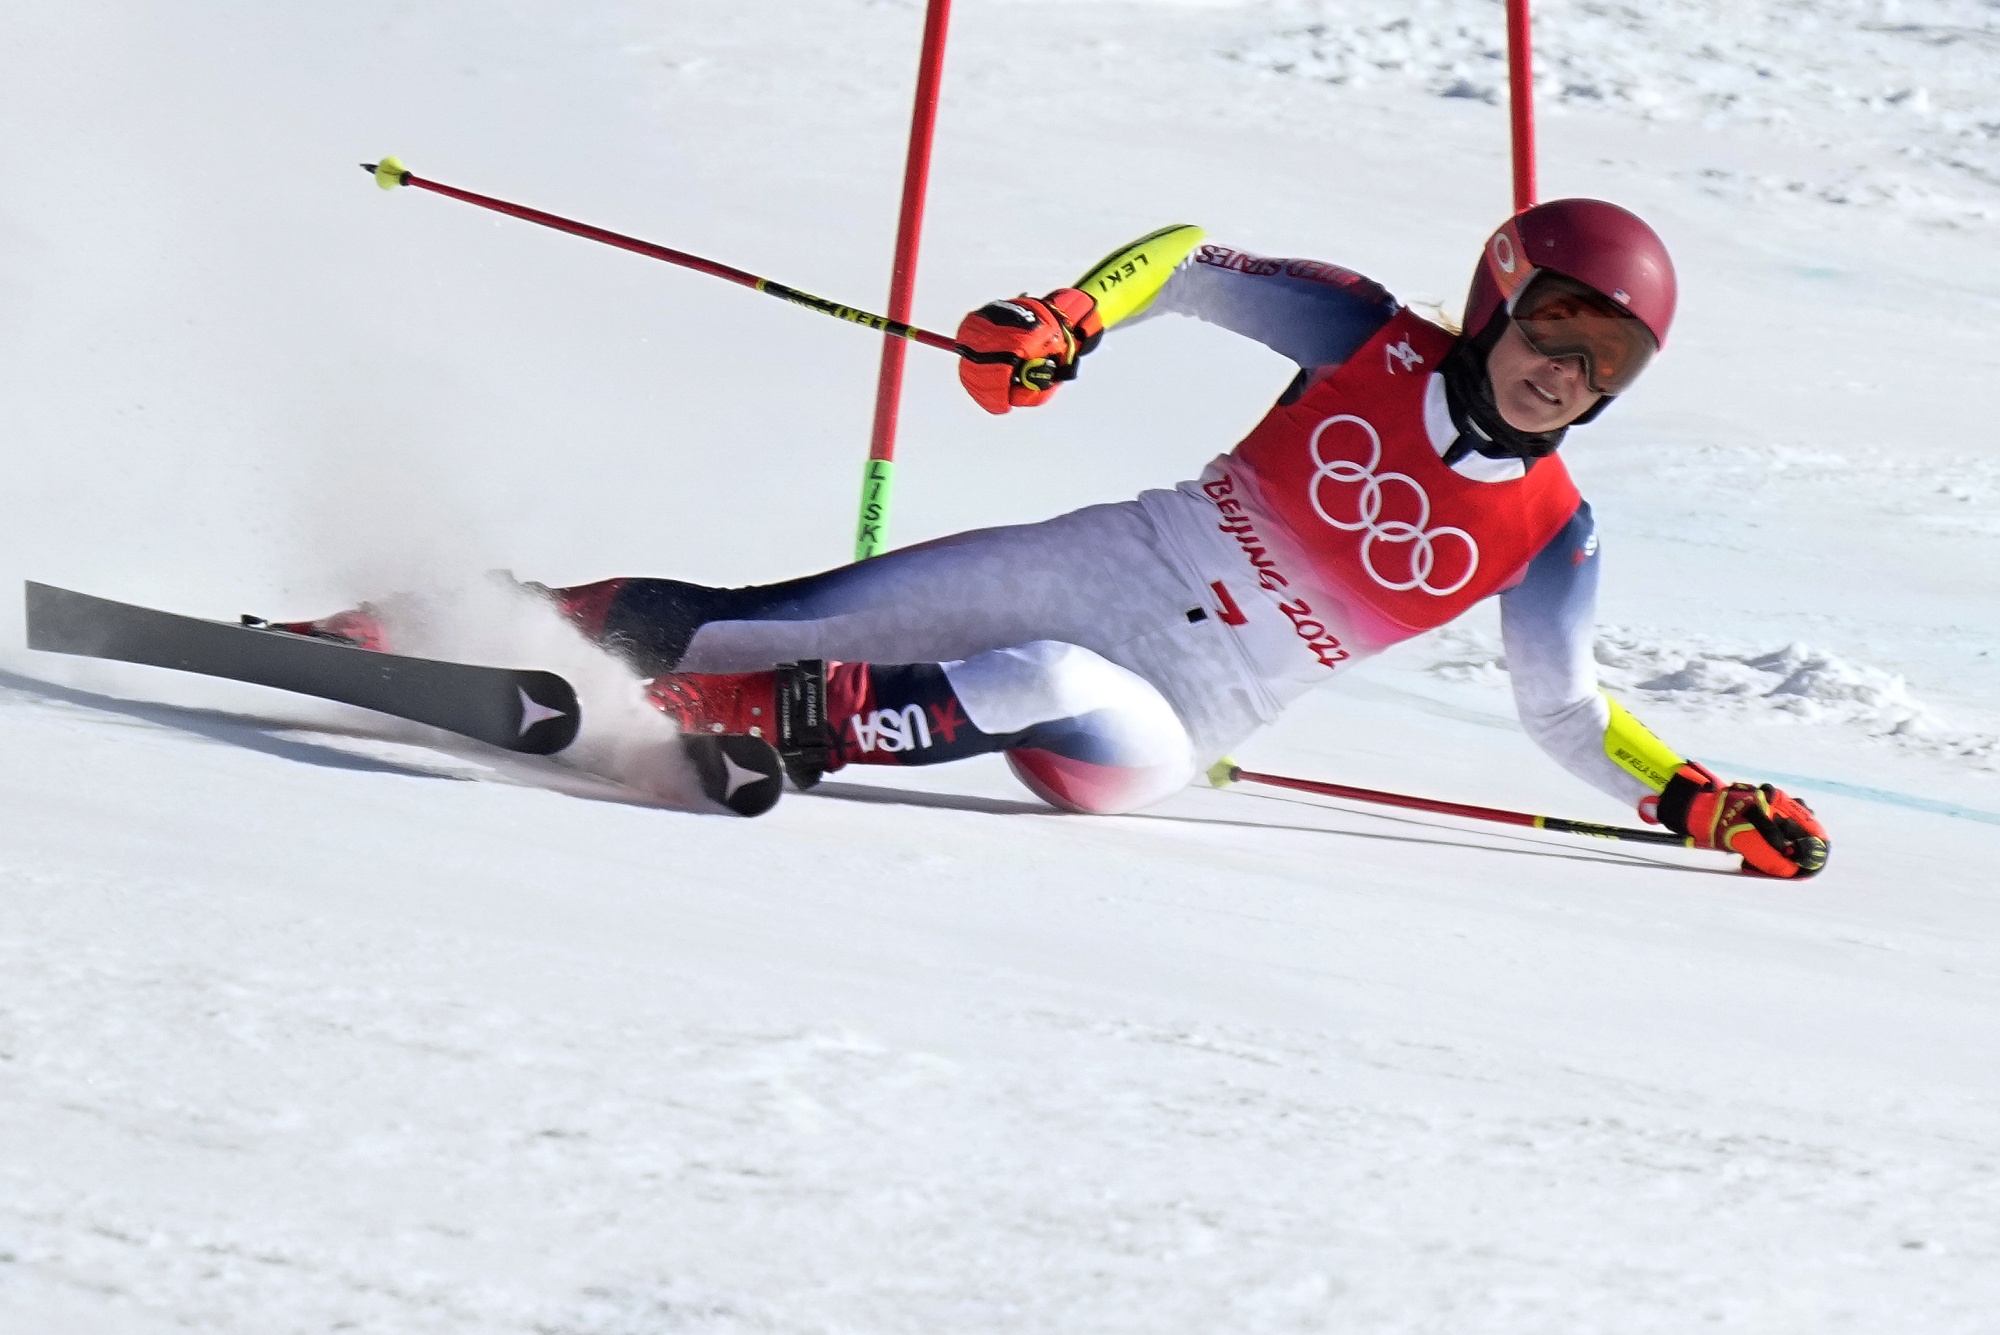 Shiffrins Fall in Olympic Giant Slalom Will Stick With Her